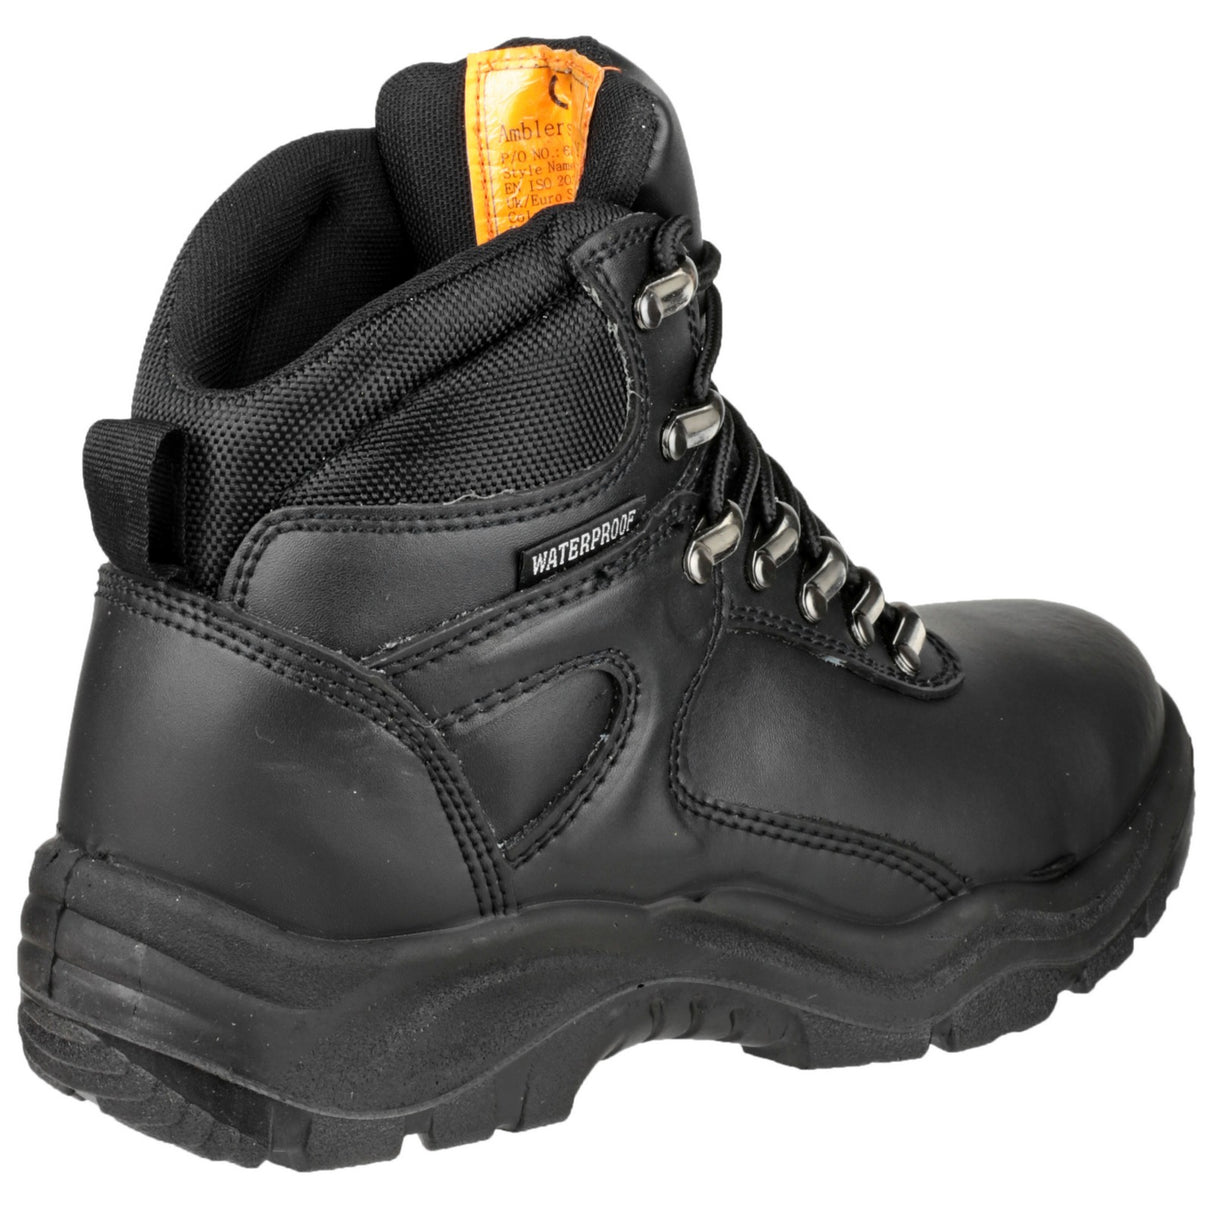 Amblers Safety FS218 Waterproof Lace up S3 Safety Boot